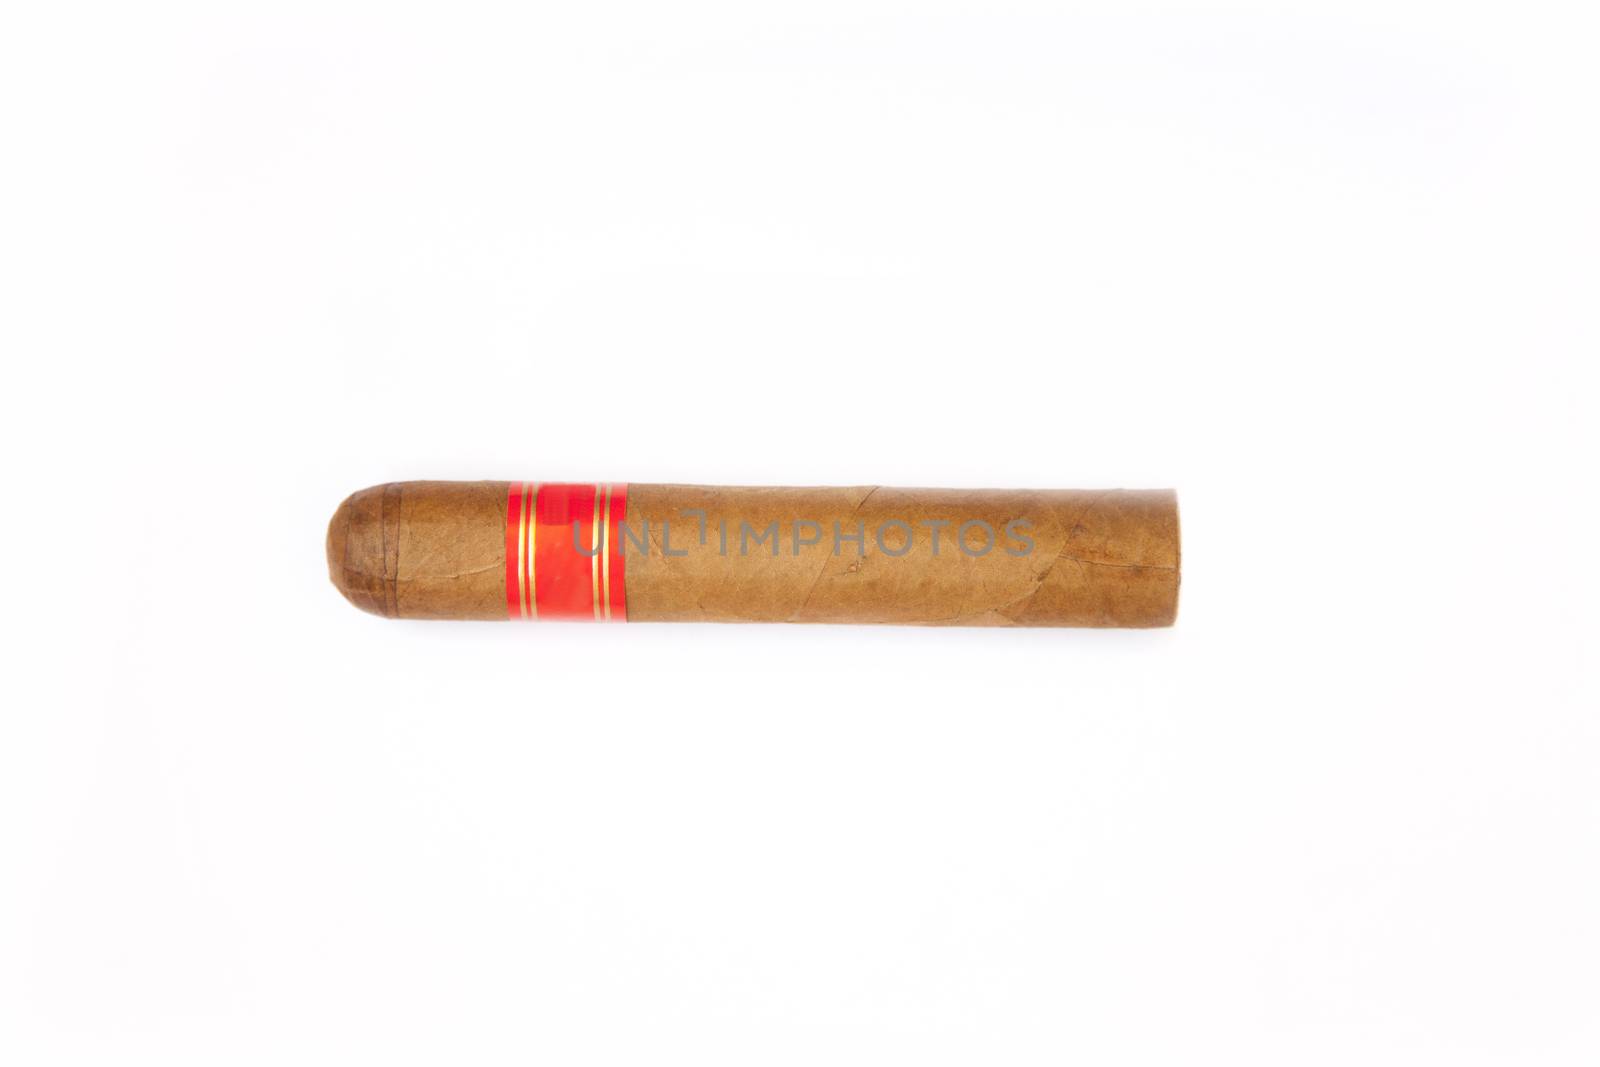 Smoking Cigar with red label isolated on a white background by haiderazim